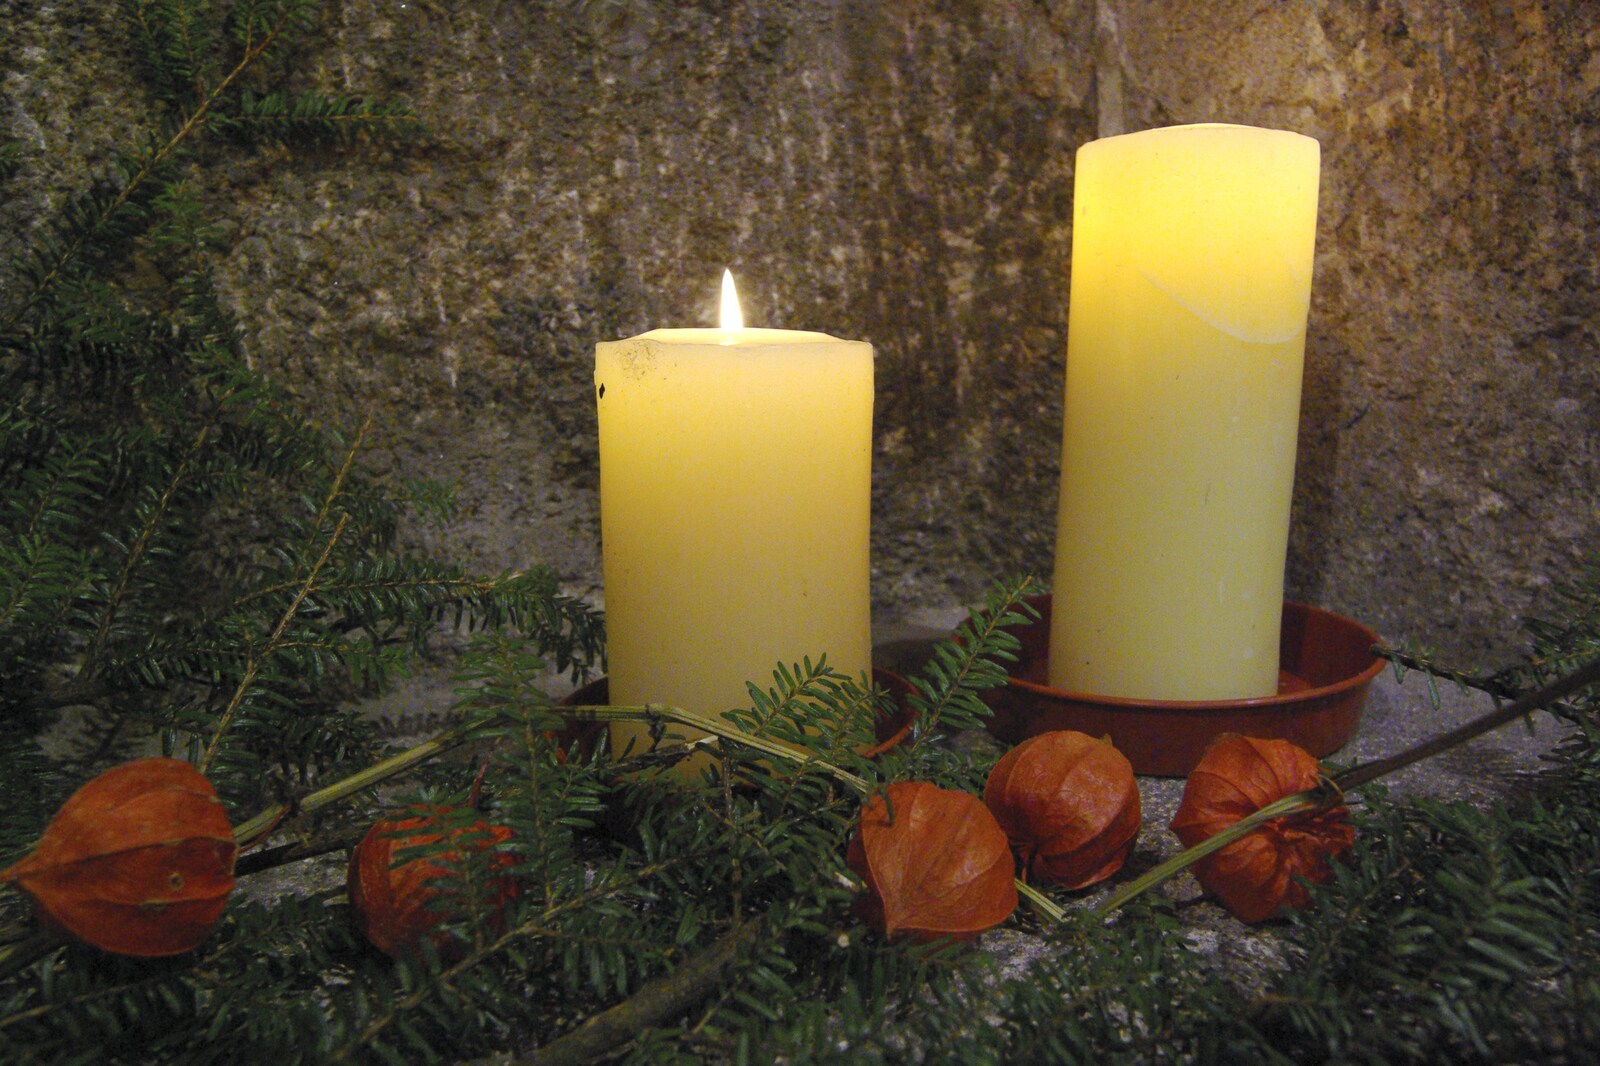 Candles and Physalis in St. Michael's, Chagford from Christmas at Sis and Matt's, Chagford, Devon - 25th December 2007